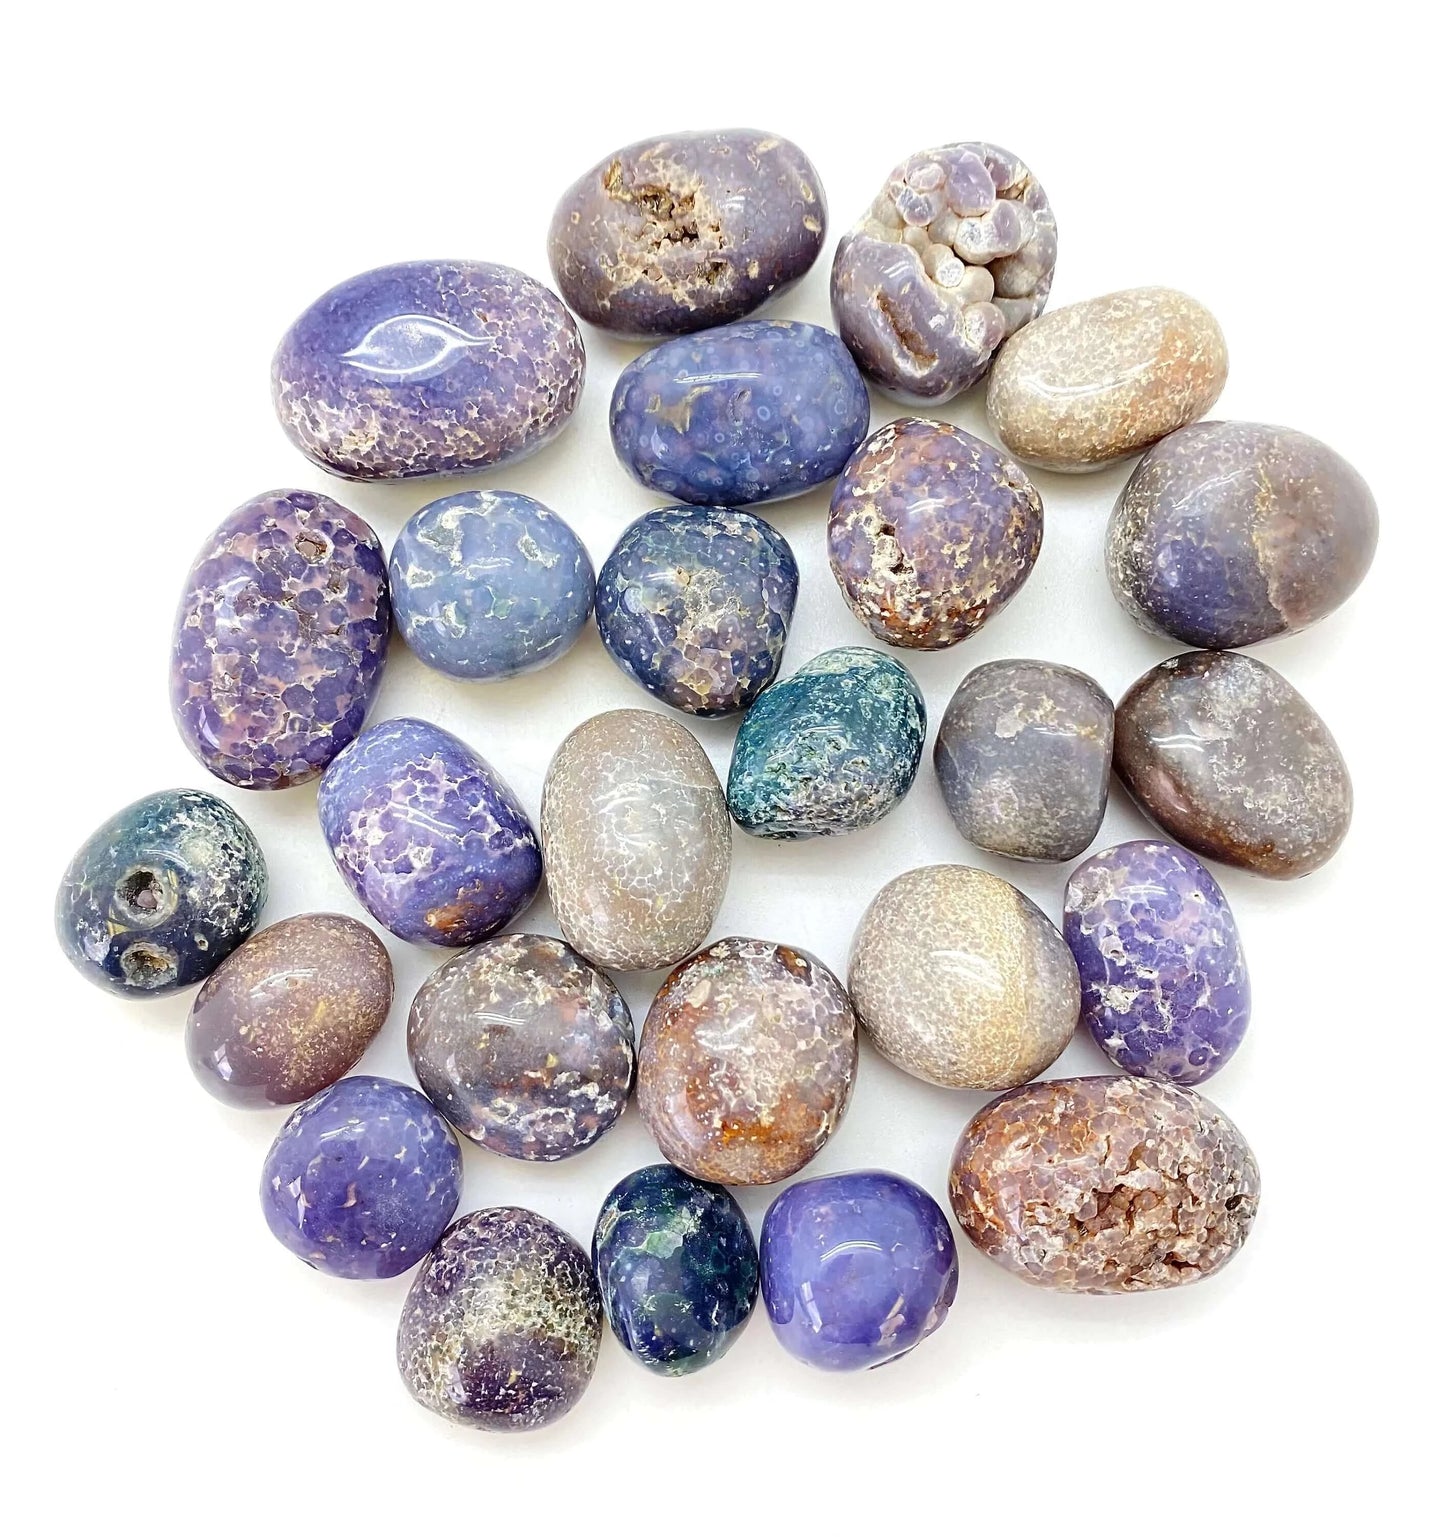 Agate Grape Tumbled at $8 only from Spiral Rain